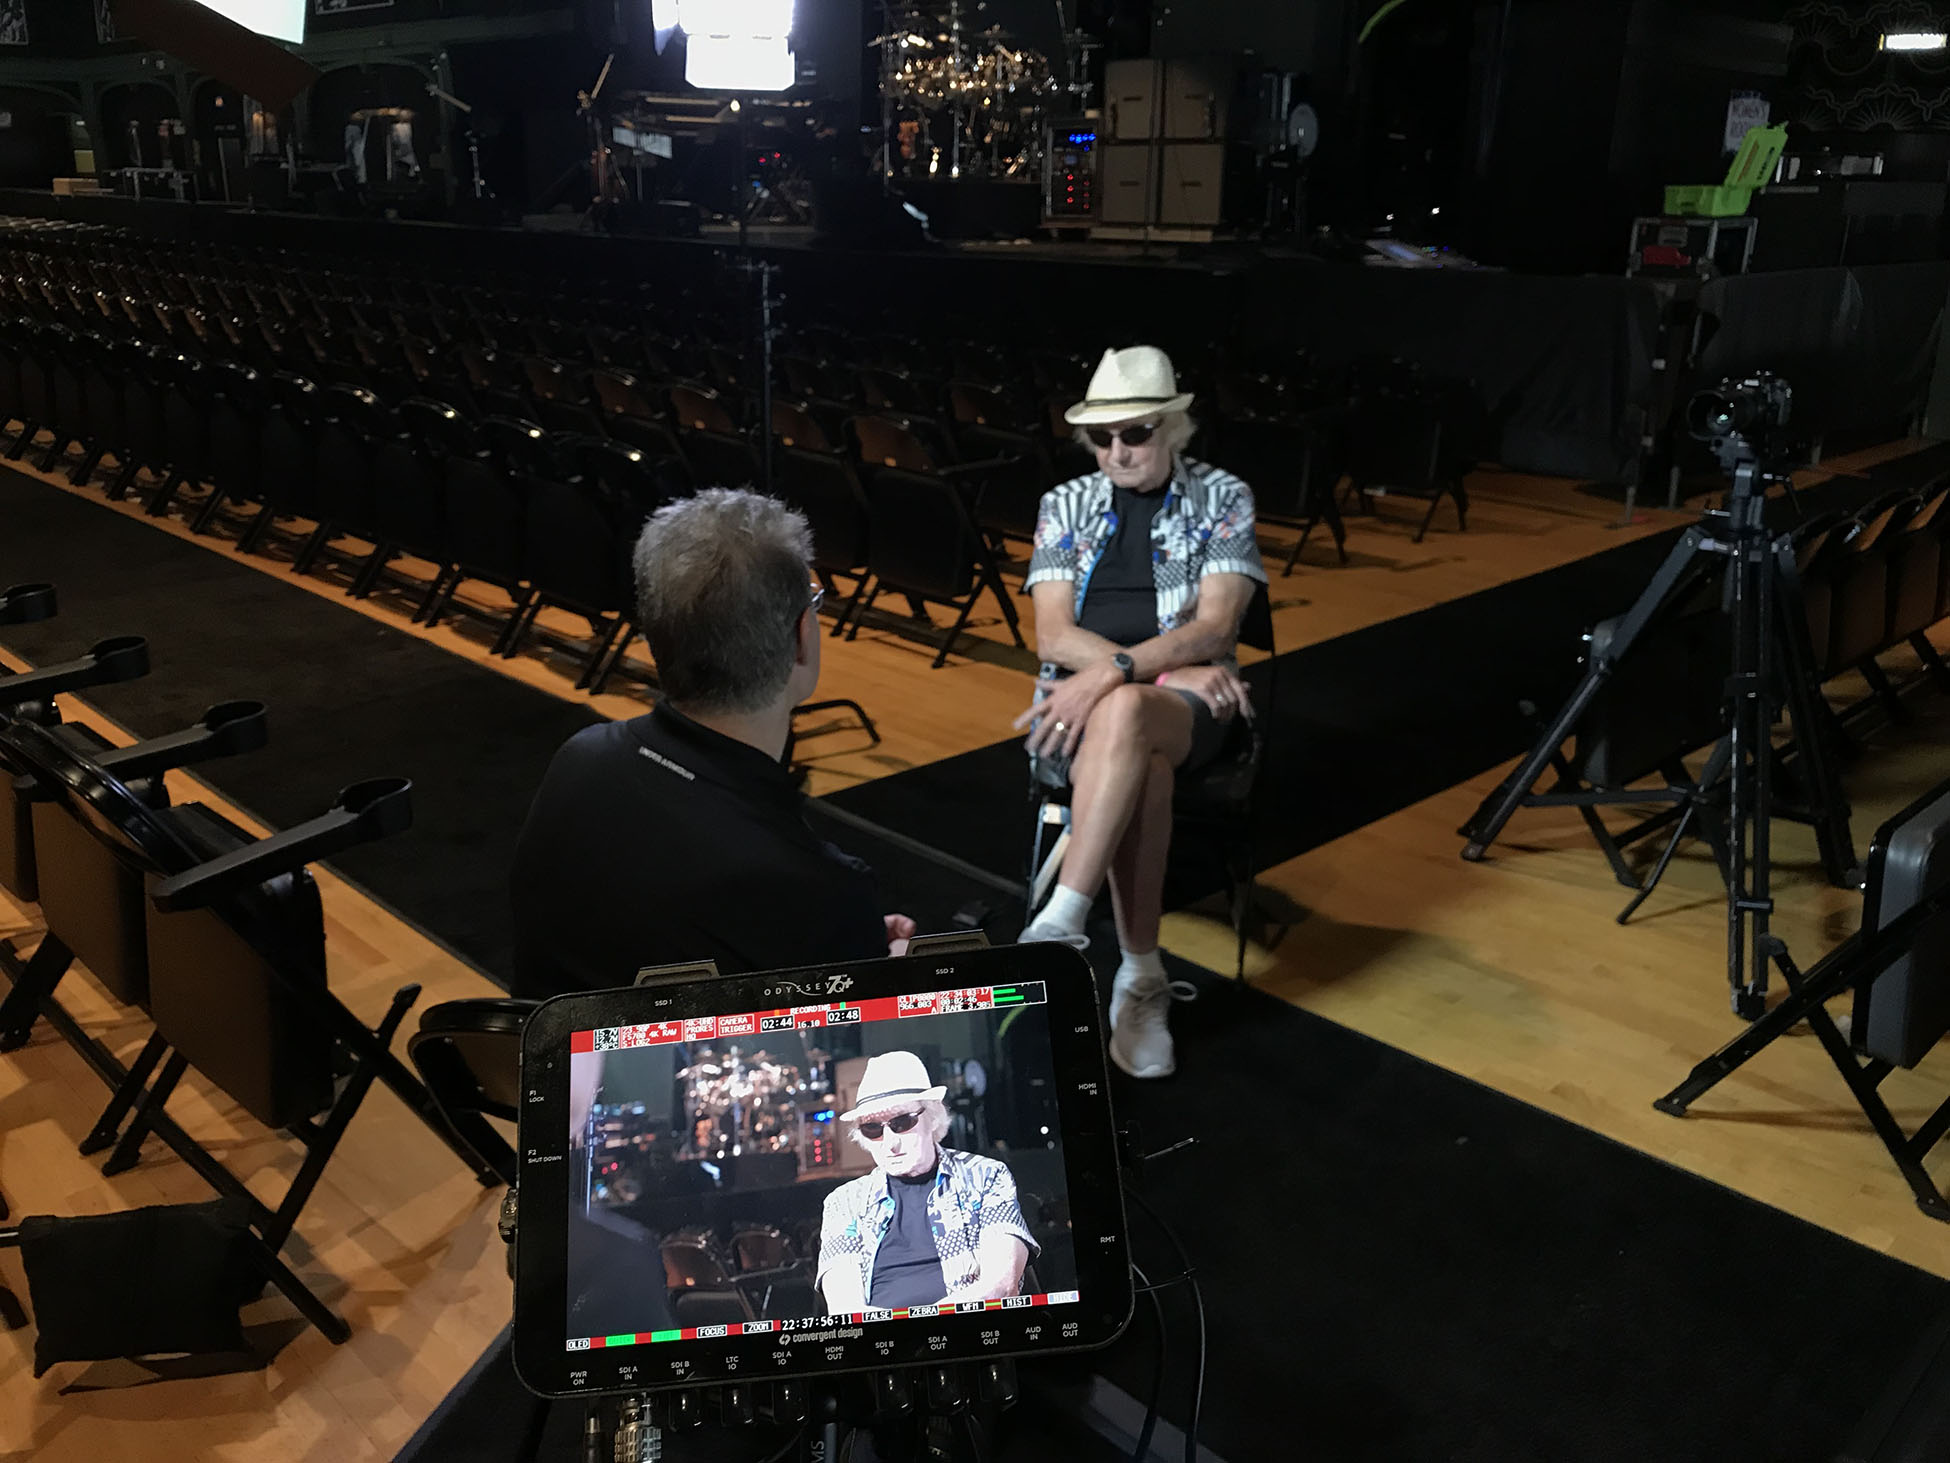 Alan White being interviewed by Elliot Gould